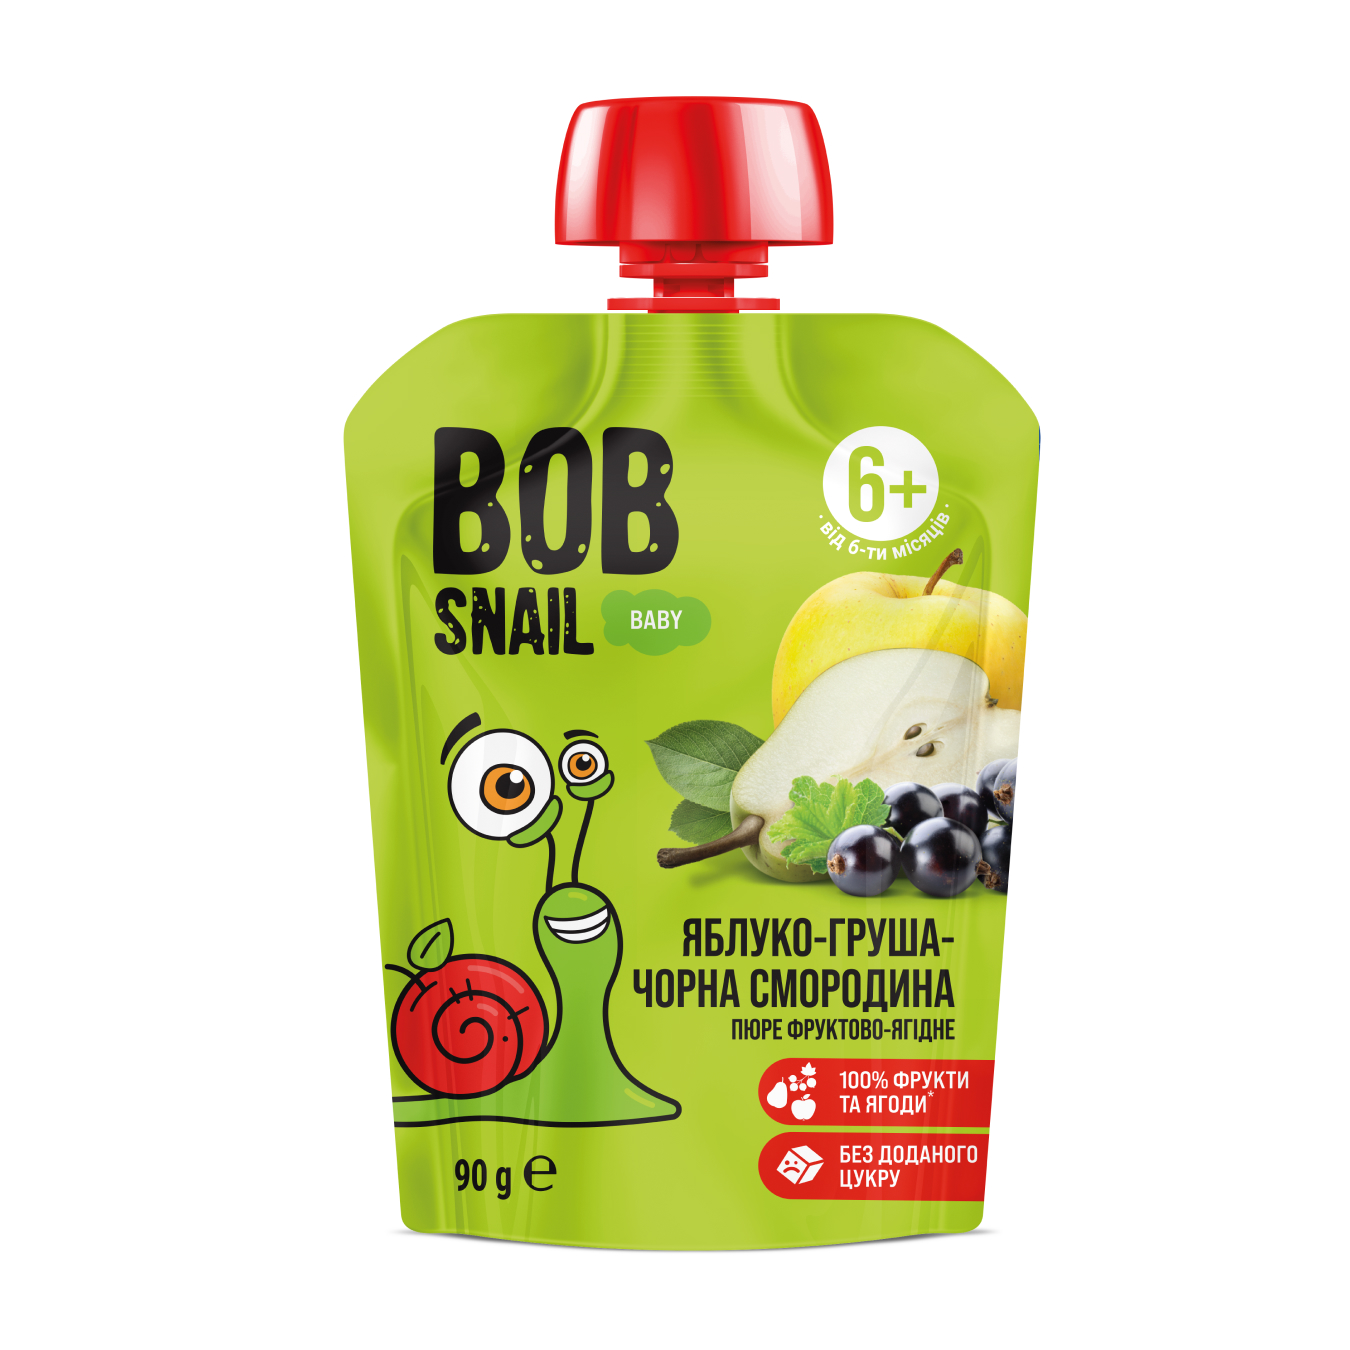 Bob Snail fruit and berry puree Apple-Pear-Blackcurrant for children from 6 months 90g